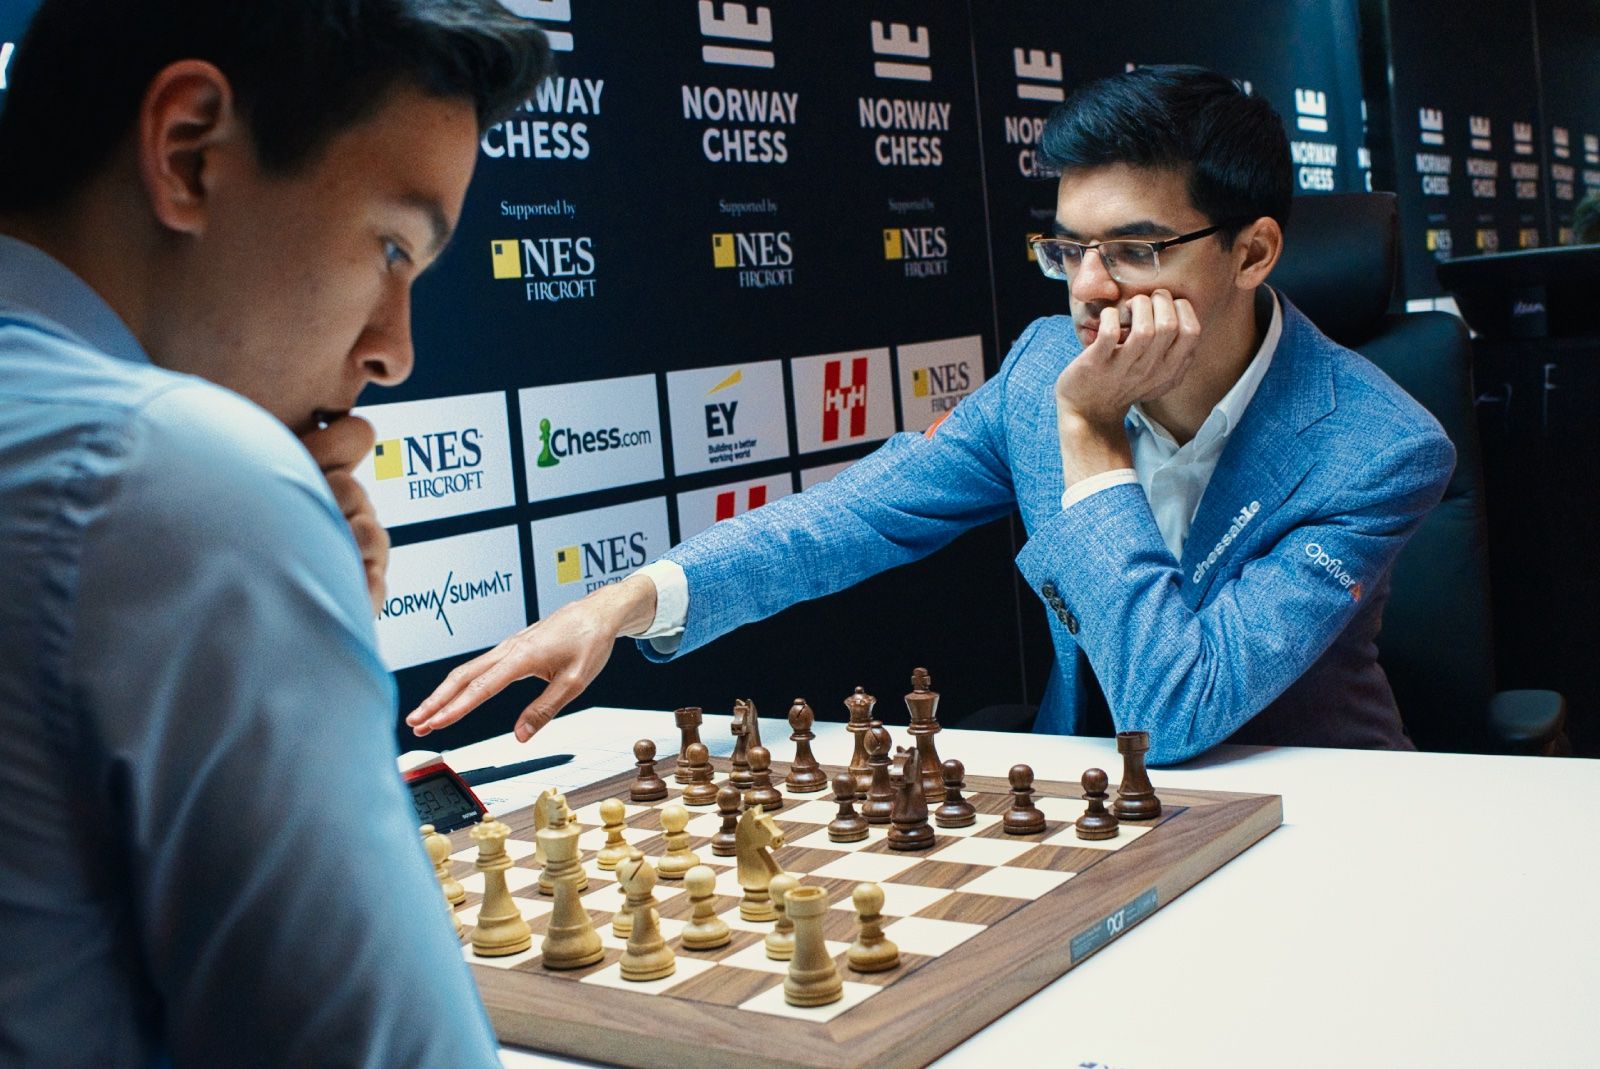 OTB Bullet vs. Gukesh After Norway Chess!! 